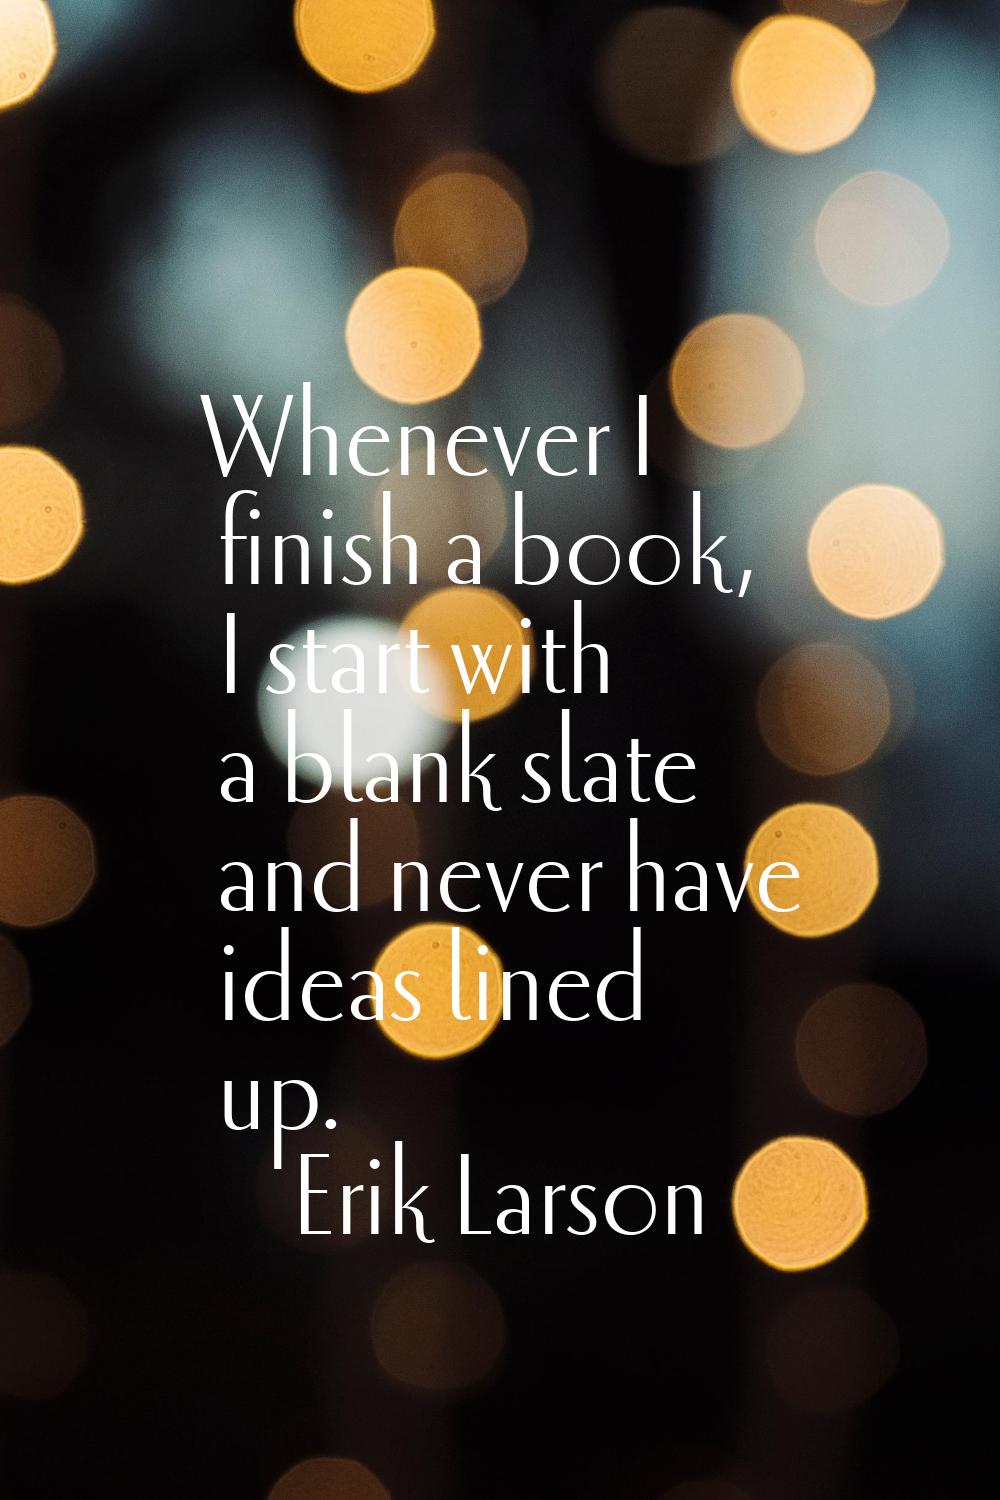 Whenever I finish a book, I start with a blank slate and never have ideas lined up.